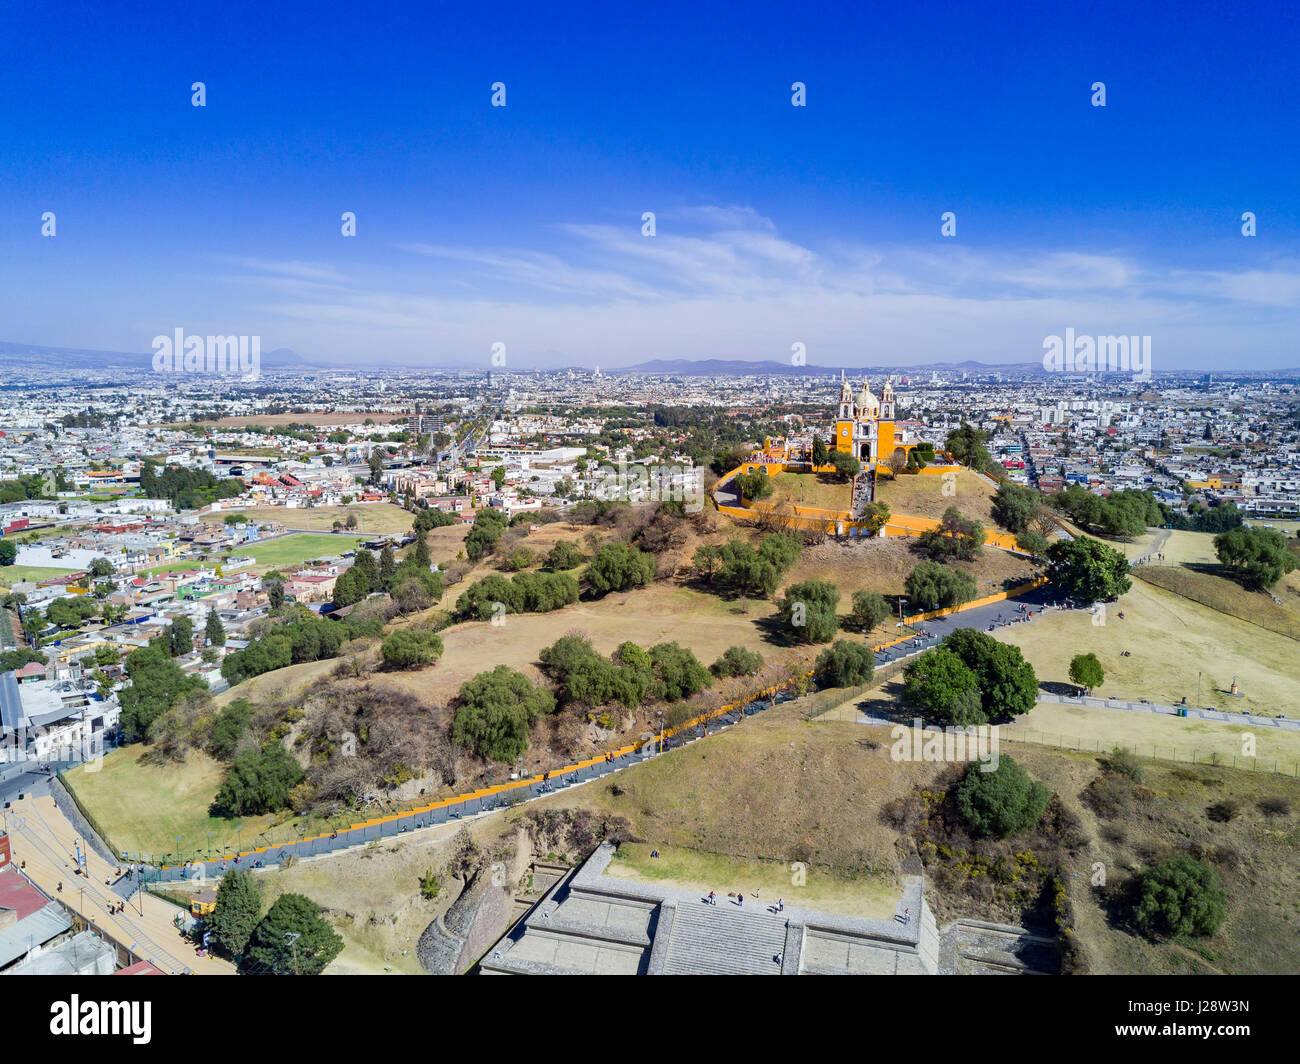 Afternoon aerial view of the famous Pyramid of Cholula, Mexico Stock Photo